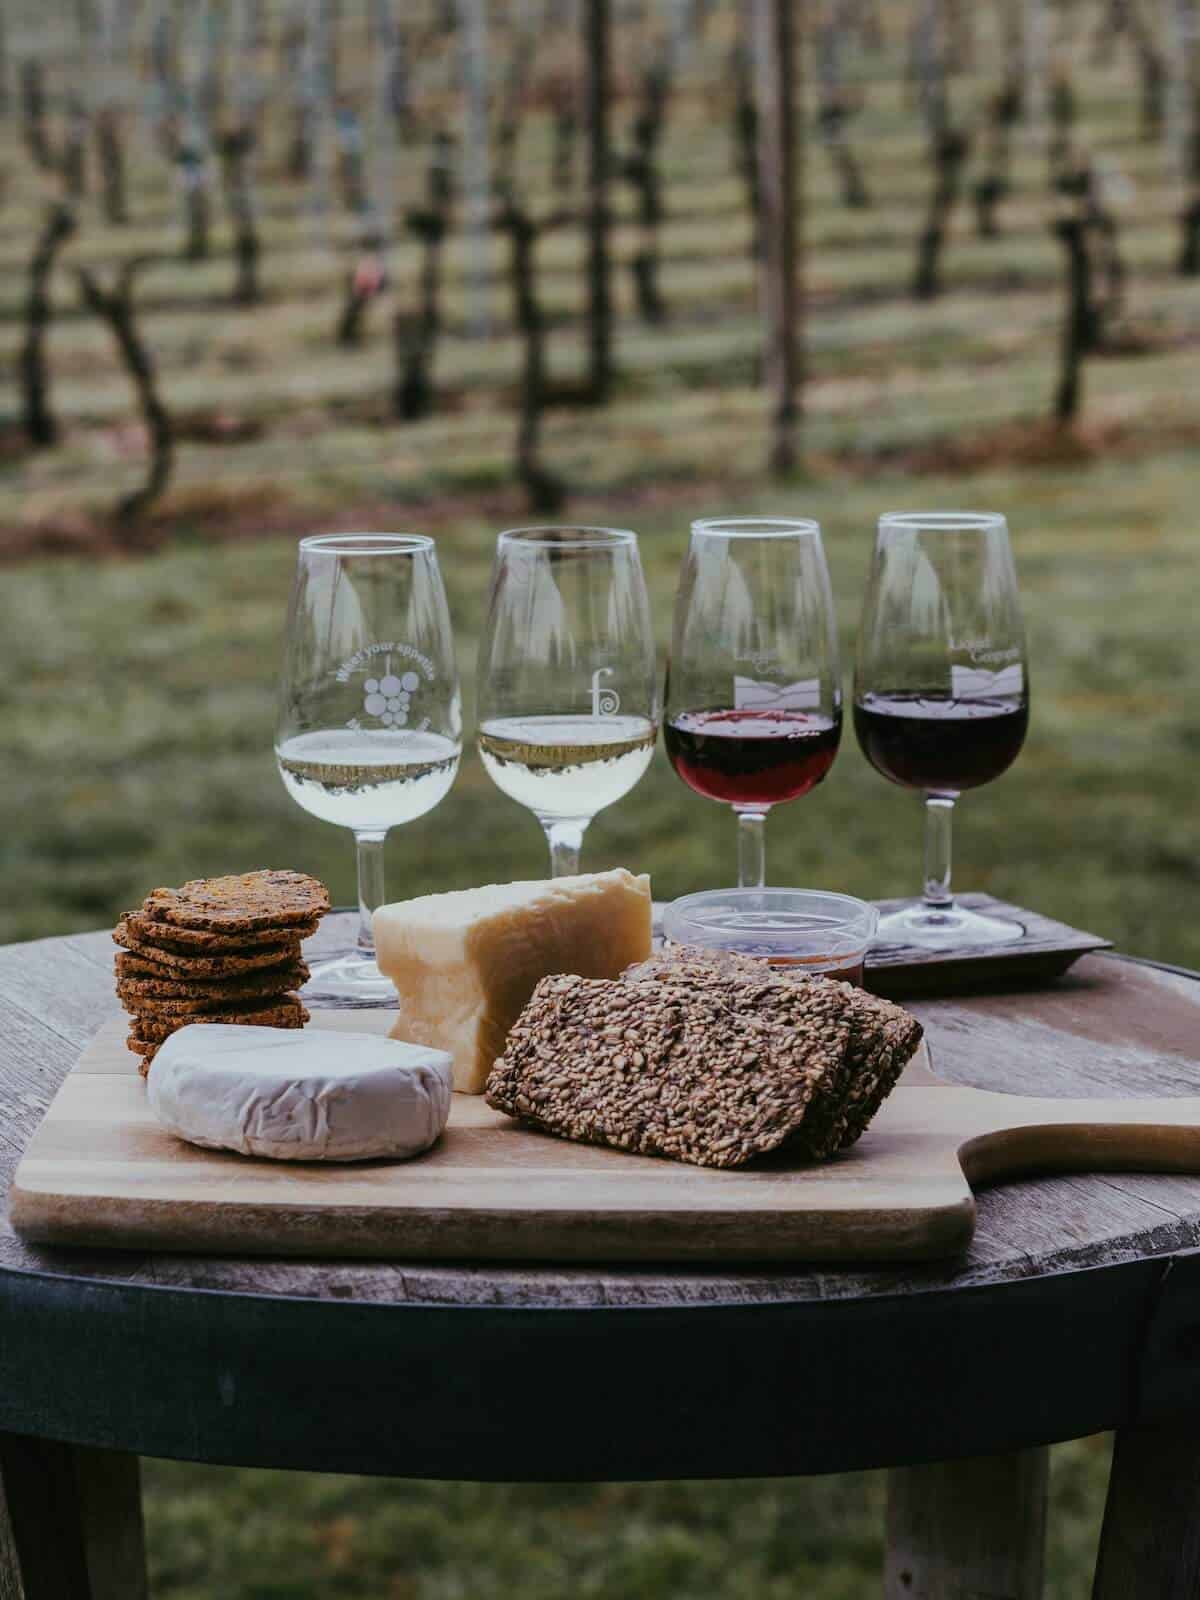 A table with a selection of French wines and cheese with a vineyard in the background.